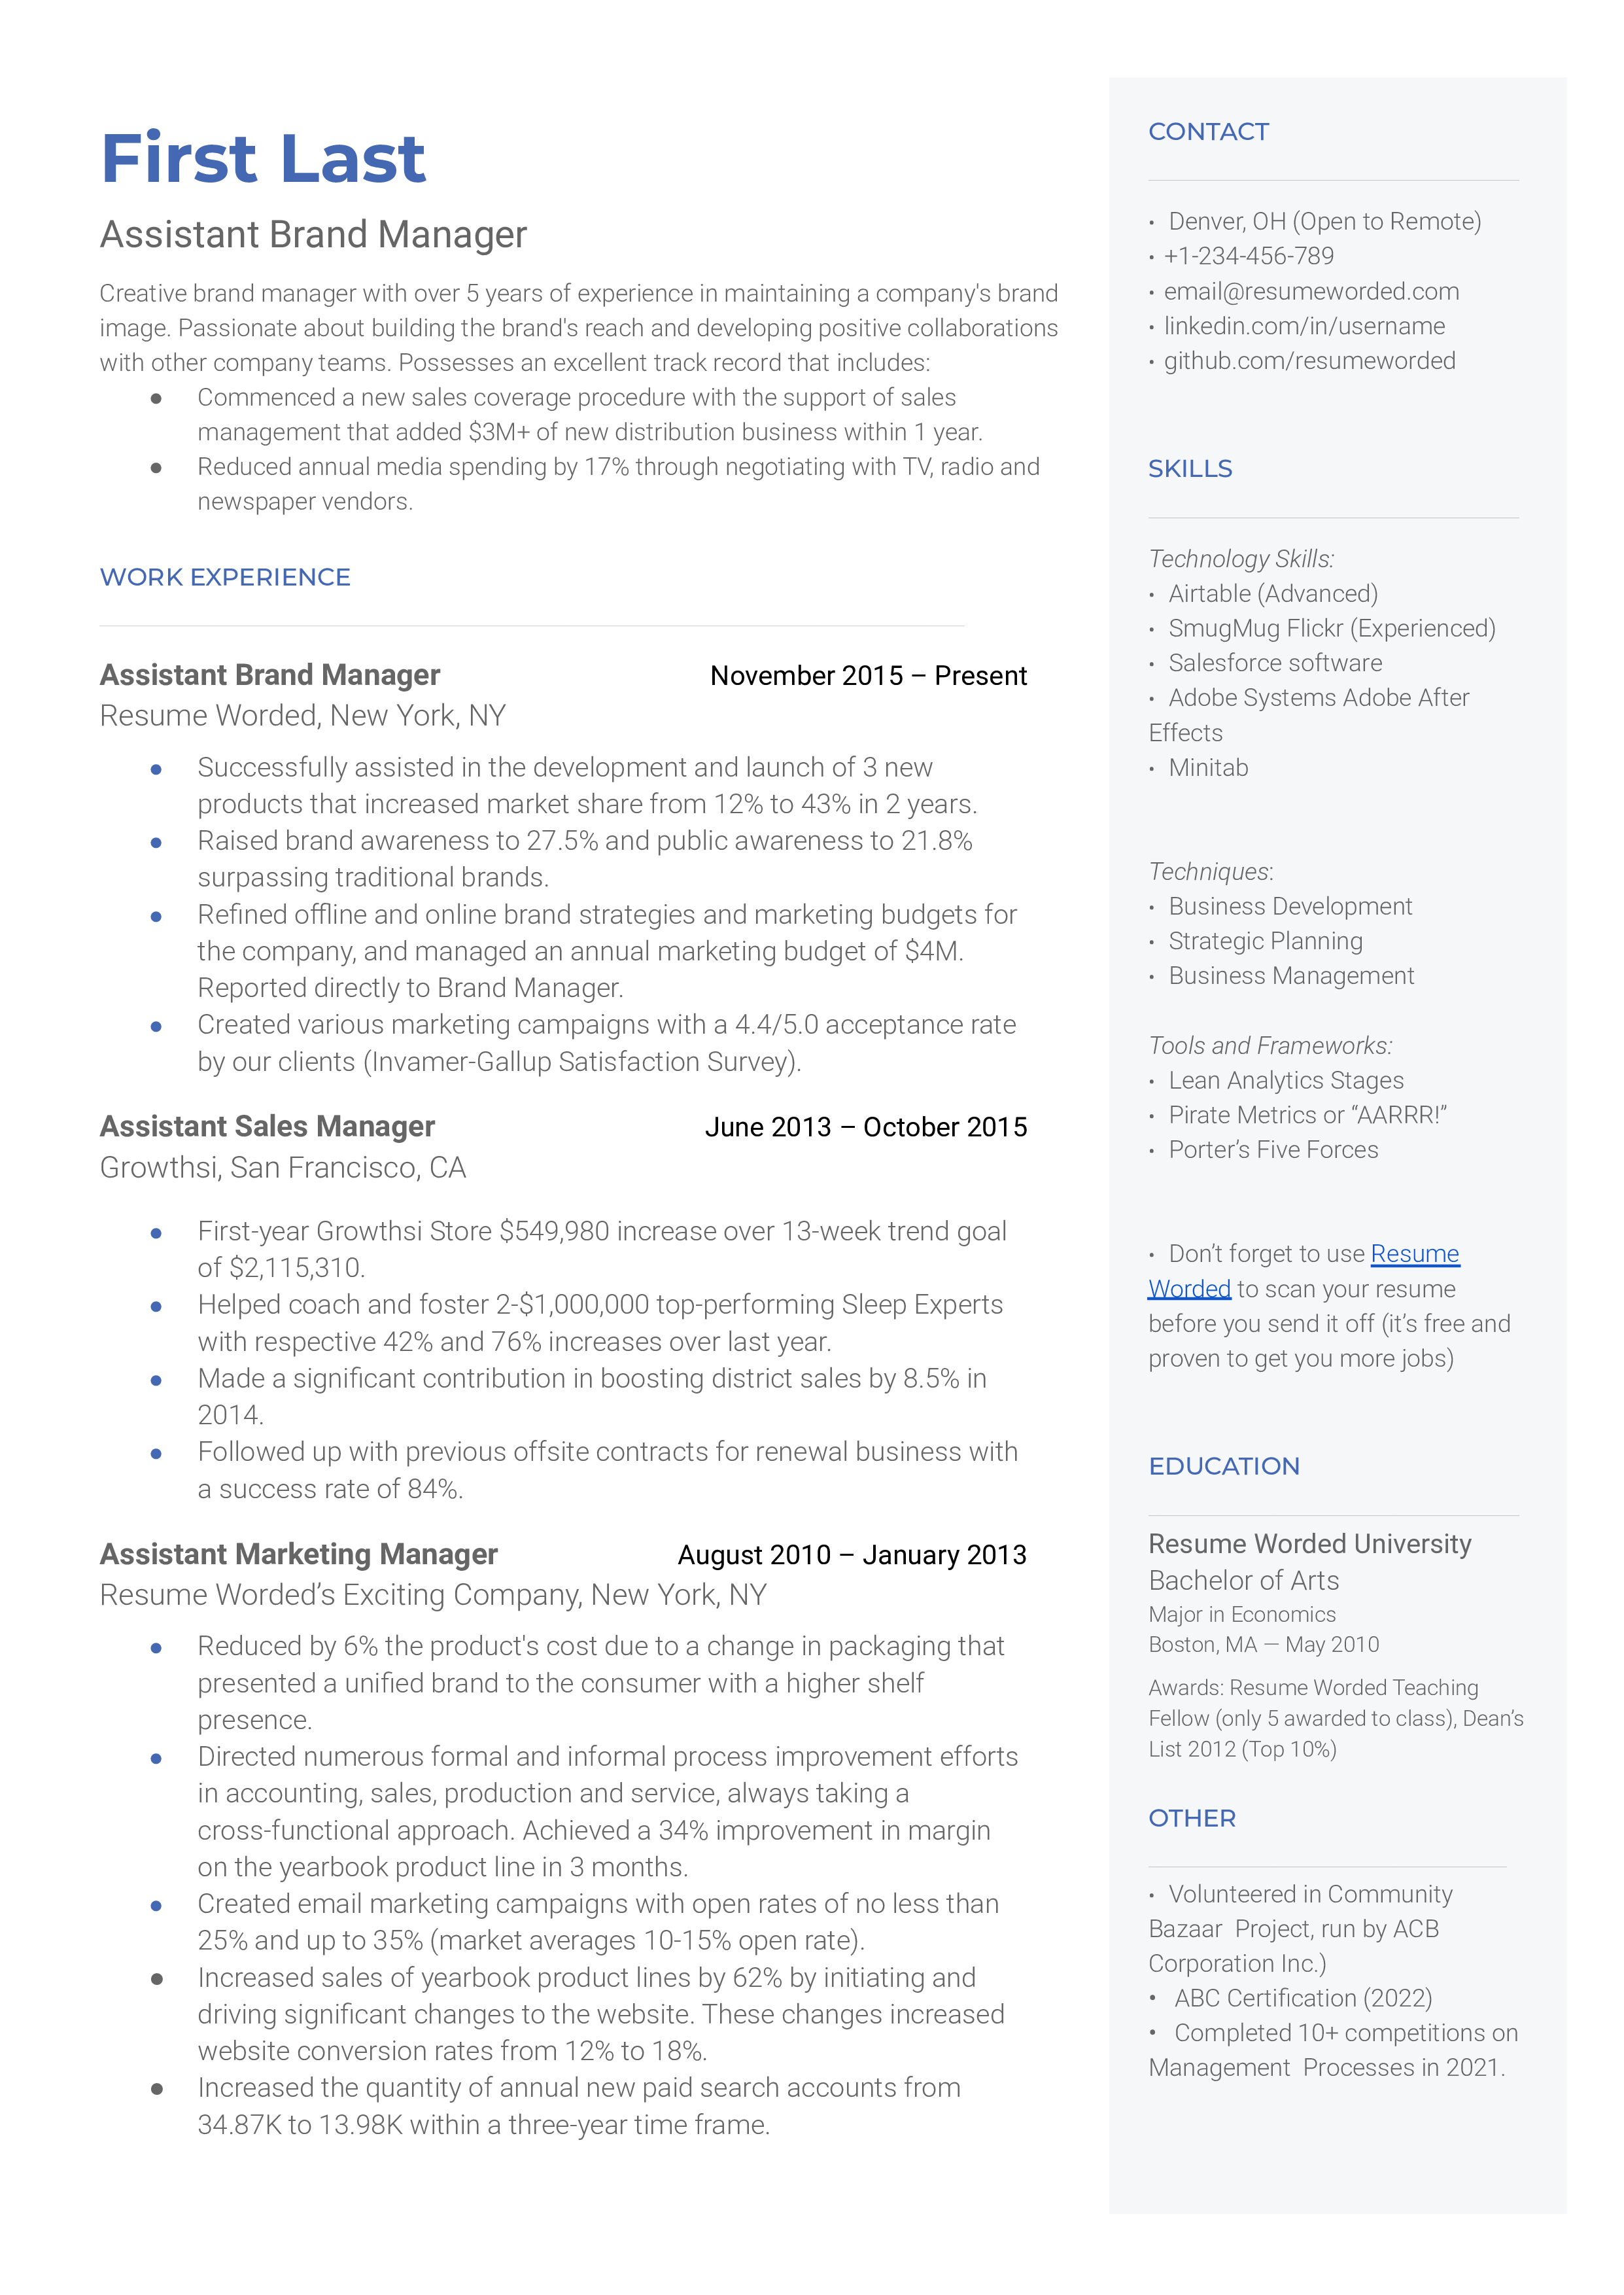 Resume screenshot for an Assistant Brand Manager role.